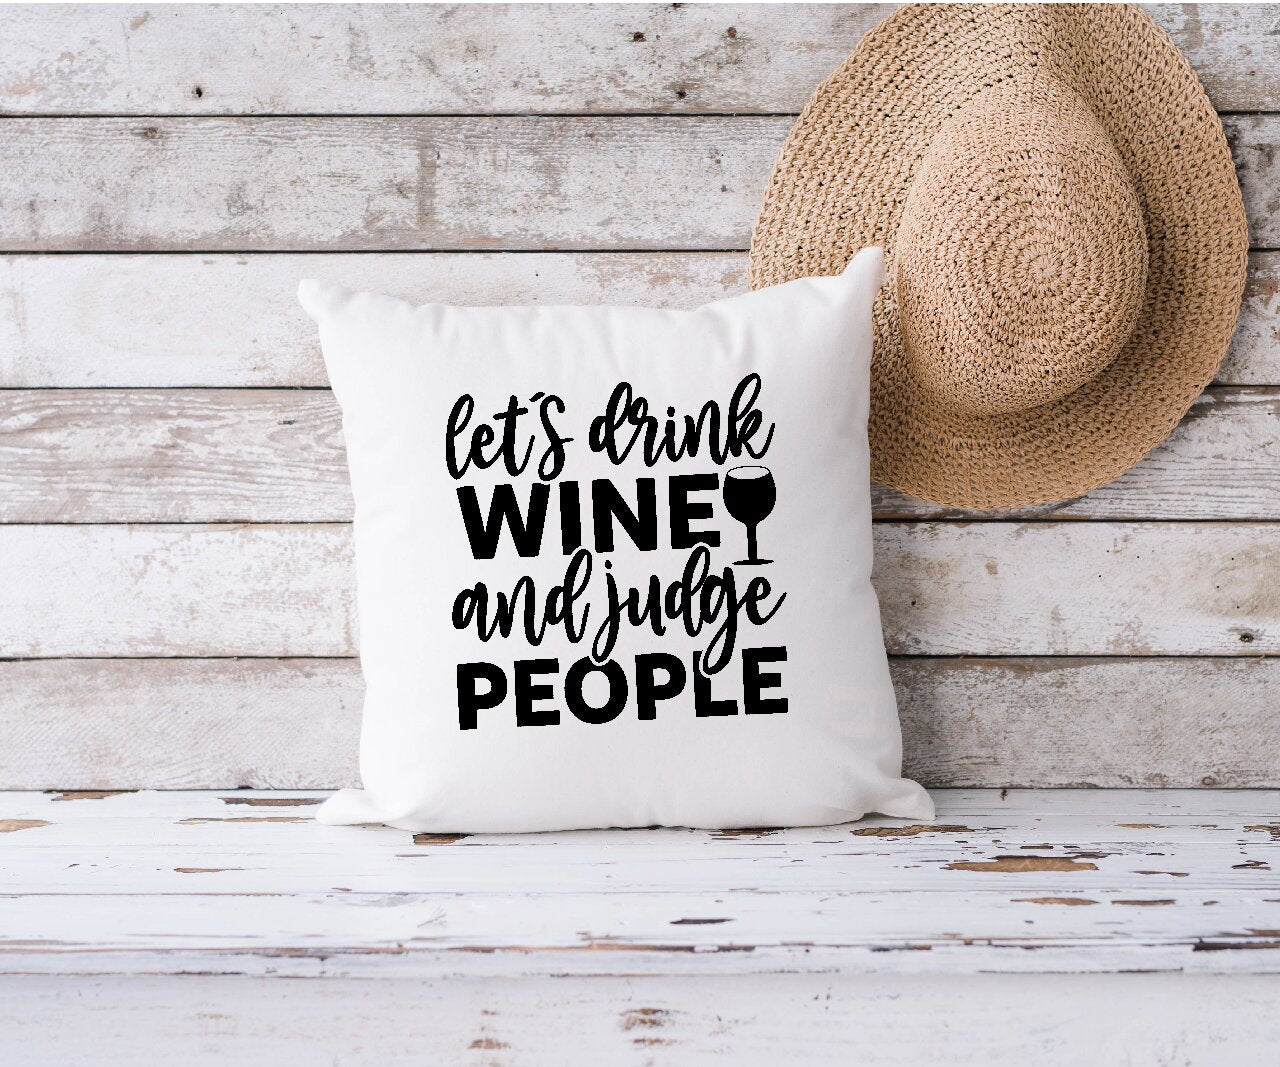 Let's drink Wine And Judge People - Cushion Cover